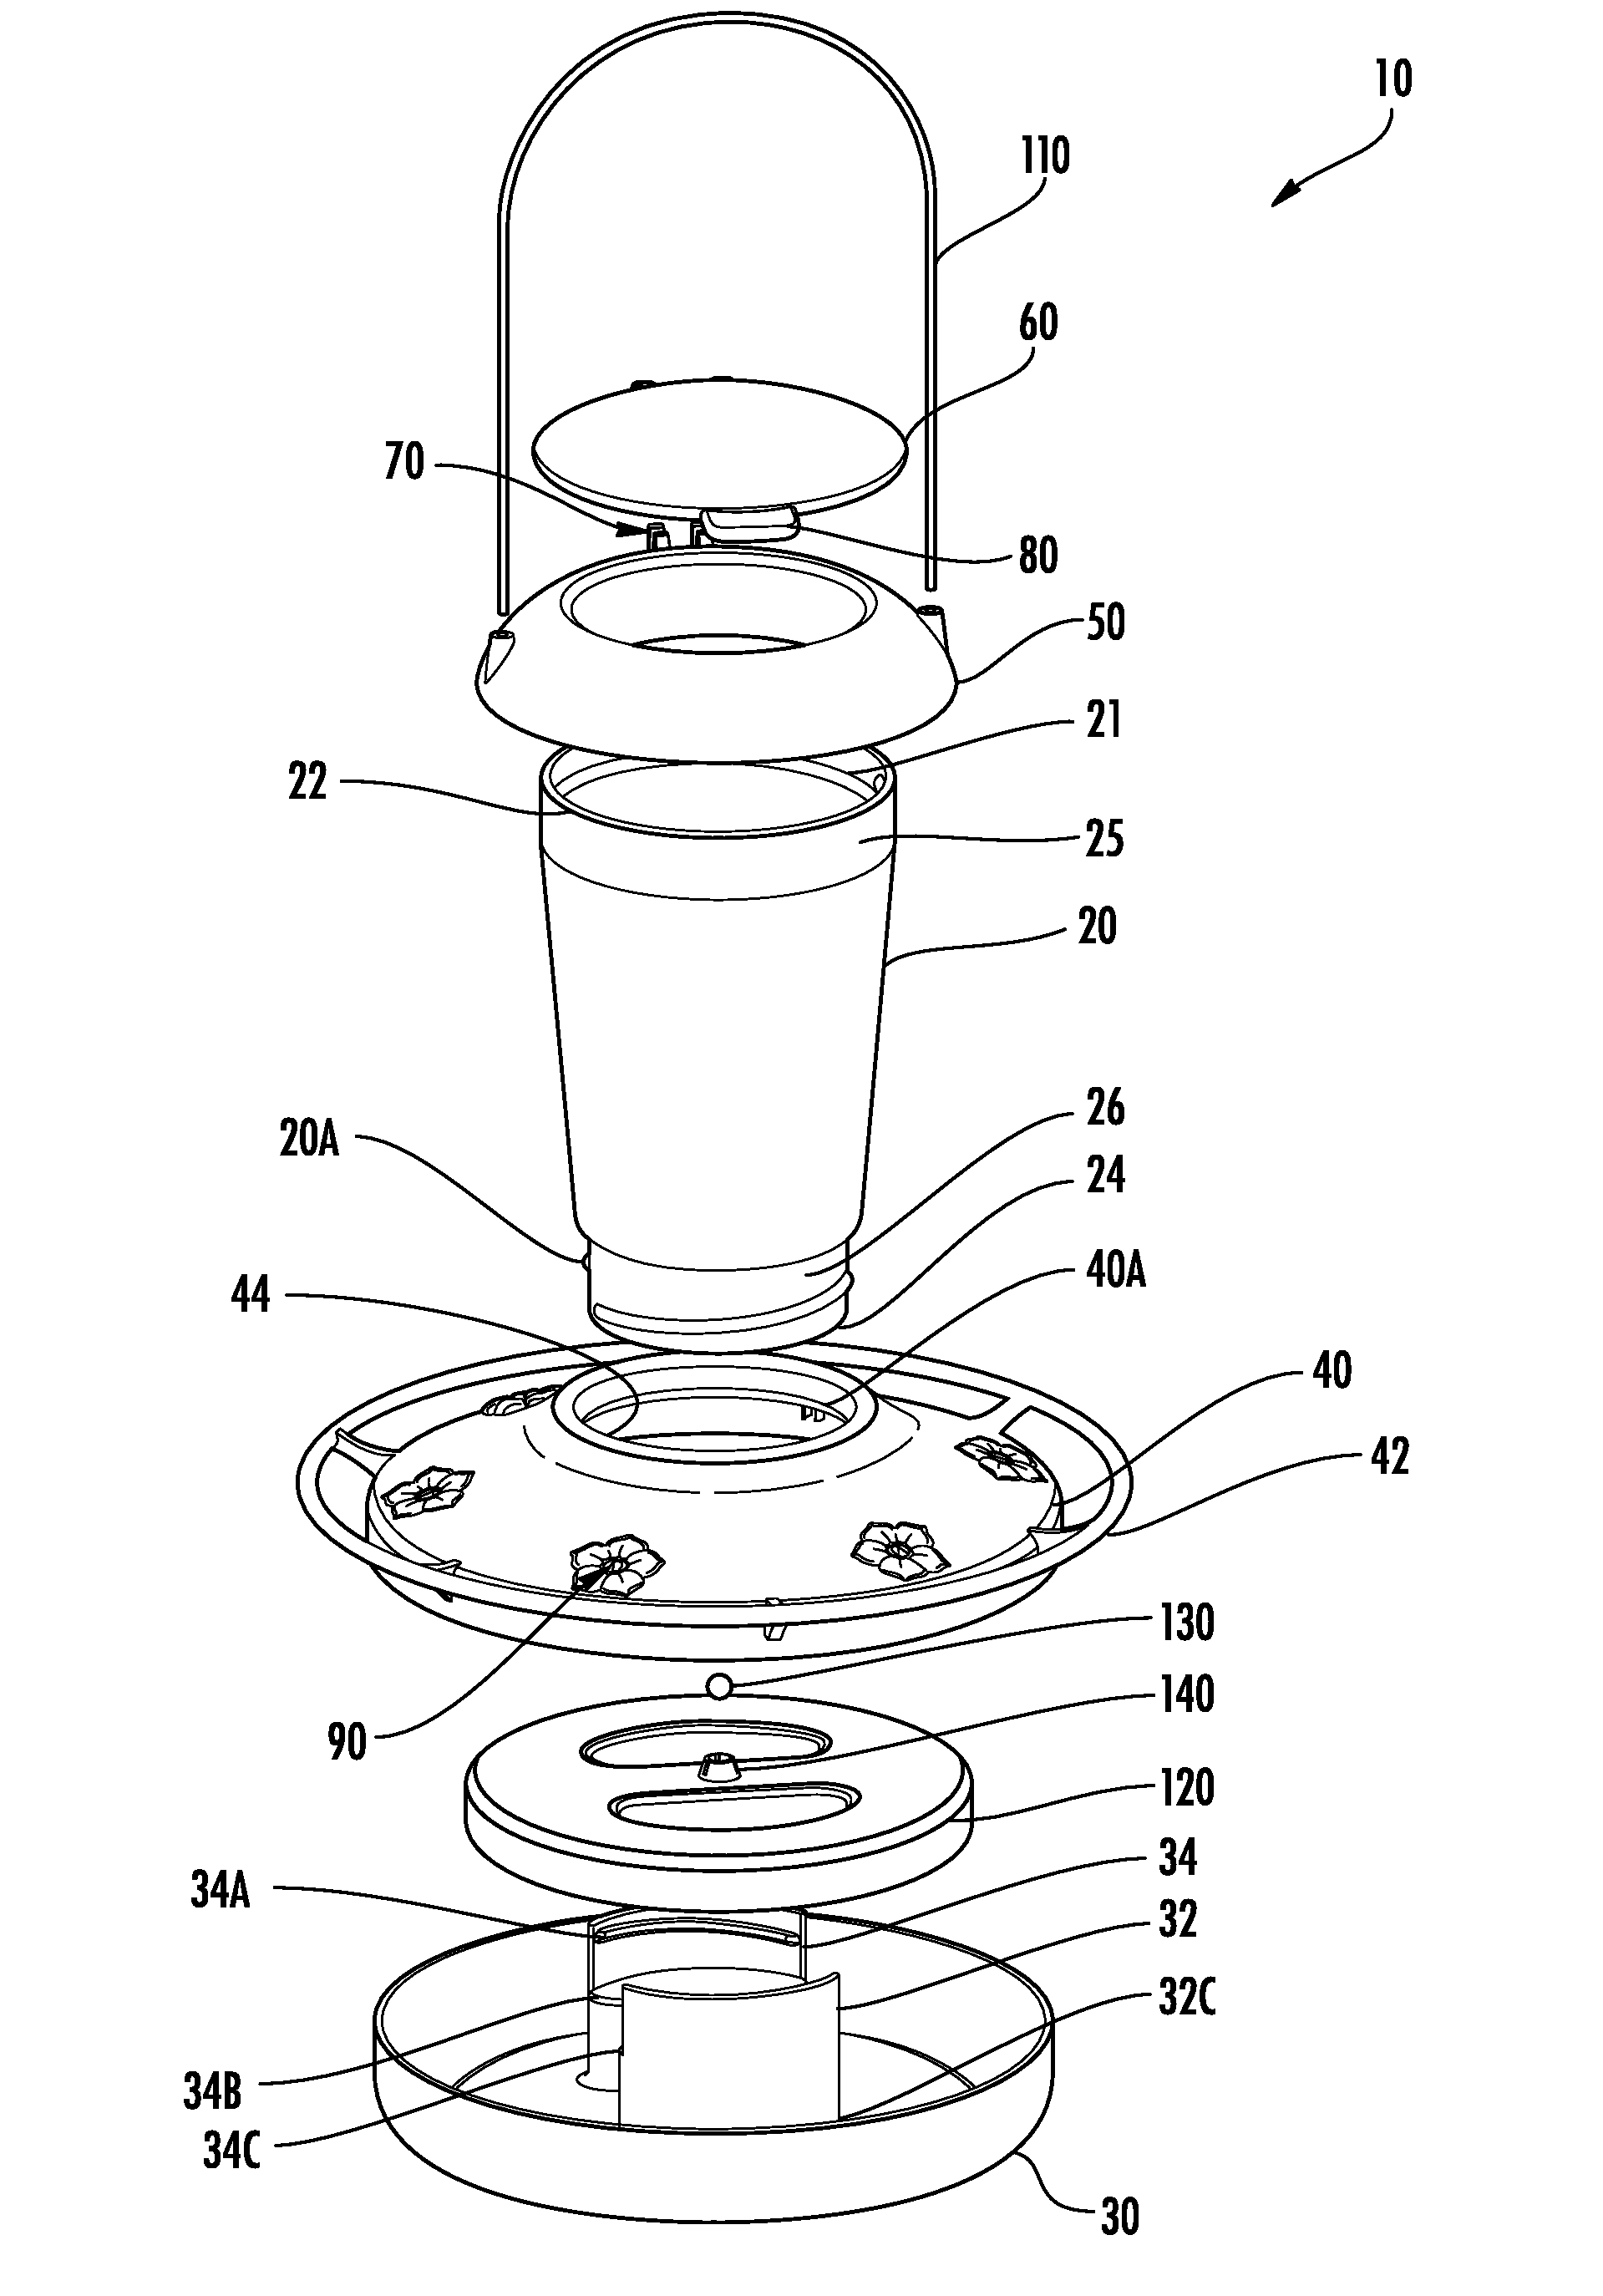 Nectar feeder with float